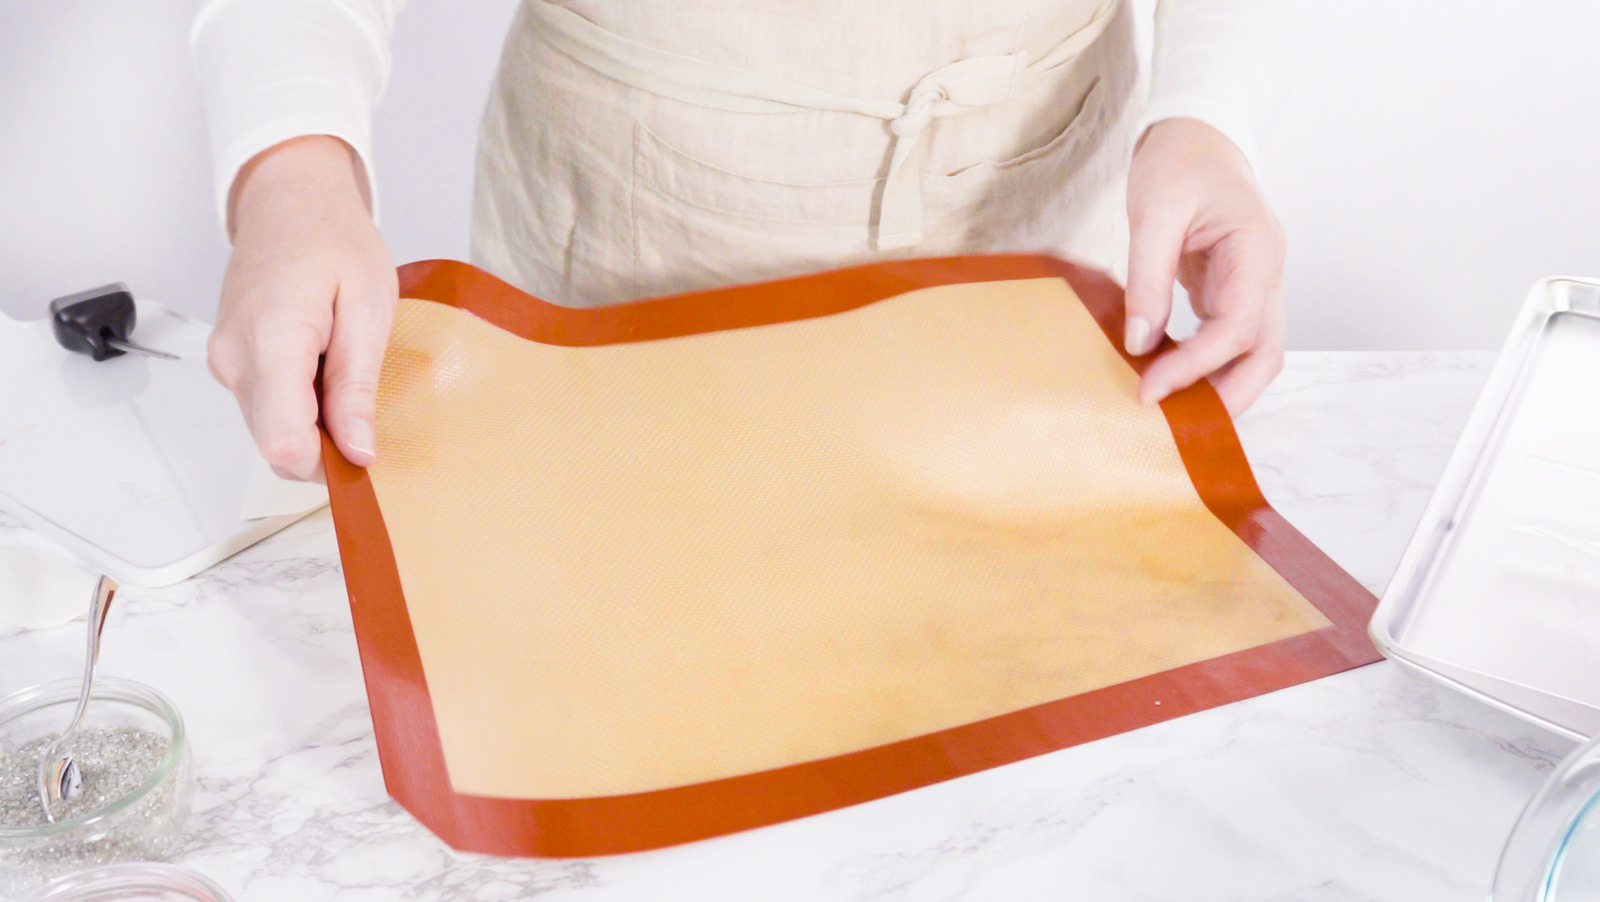 What are the advantages of silicone mats and how to use them?